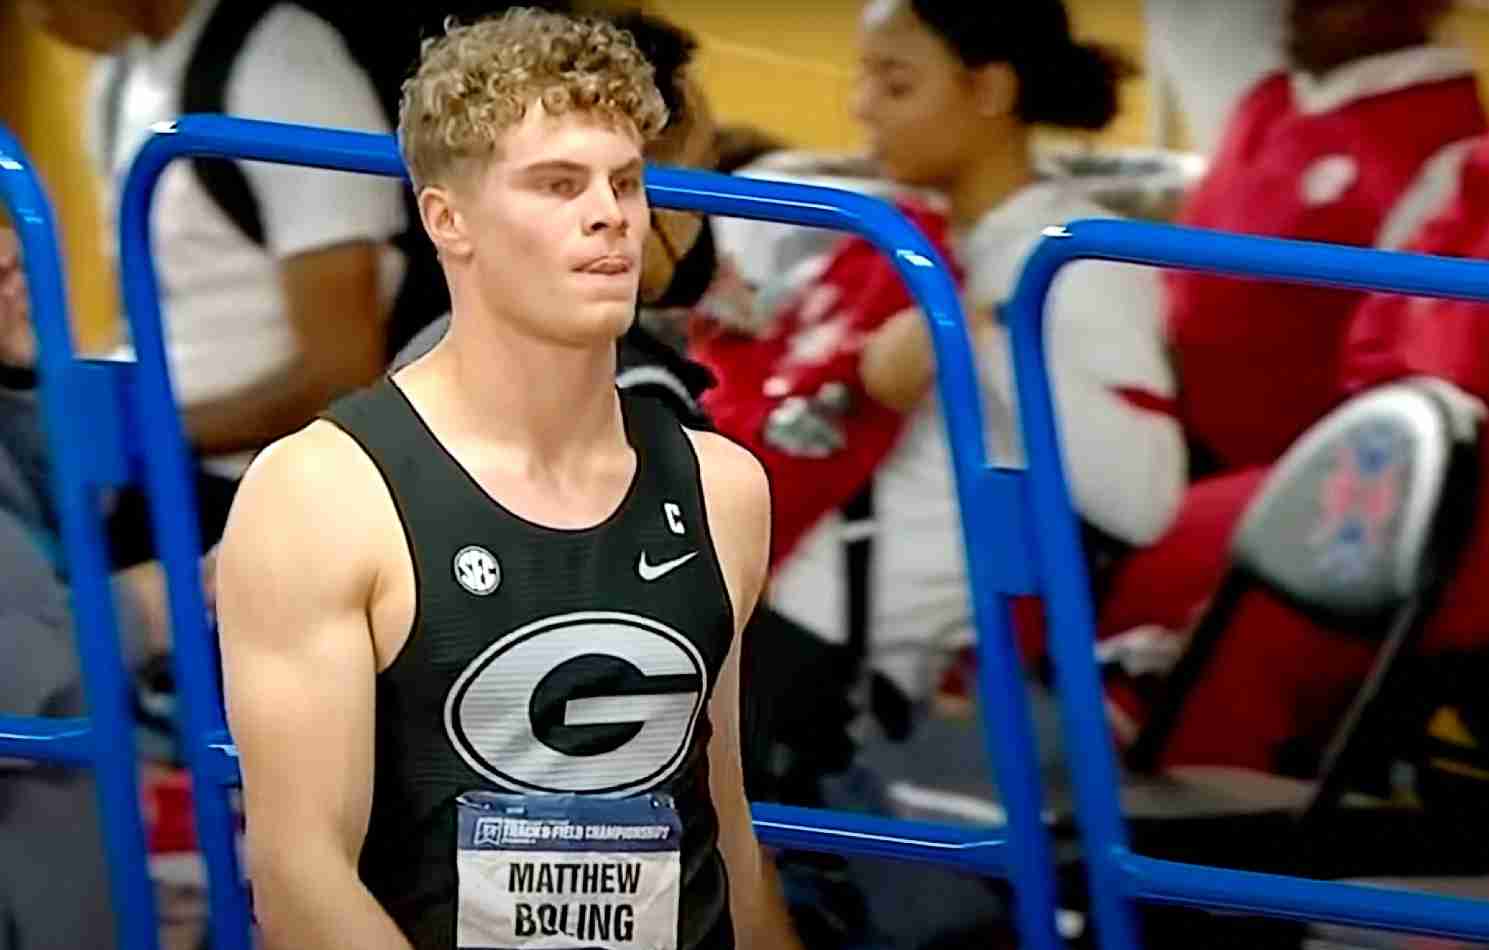 How to watch the 2023 Clemson Invite? Matthew Boling and Anna Hall in action